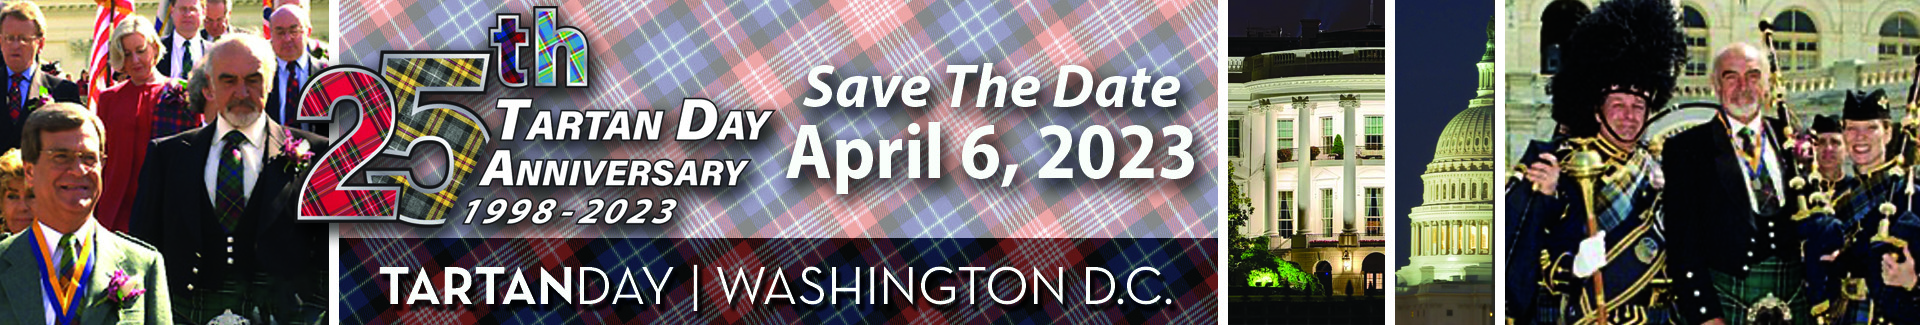 Save the Date for Tartan Day DC 2023